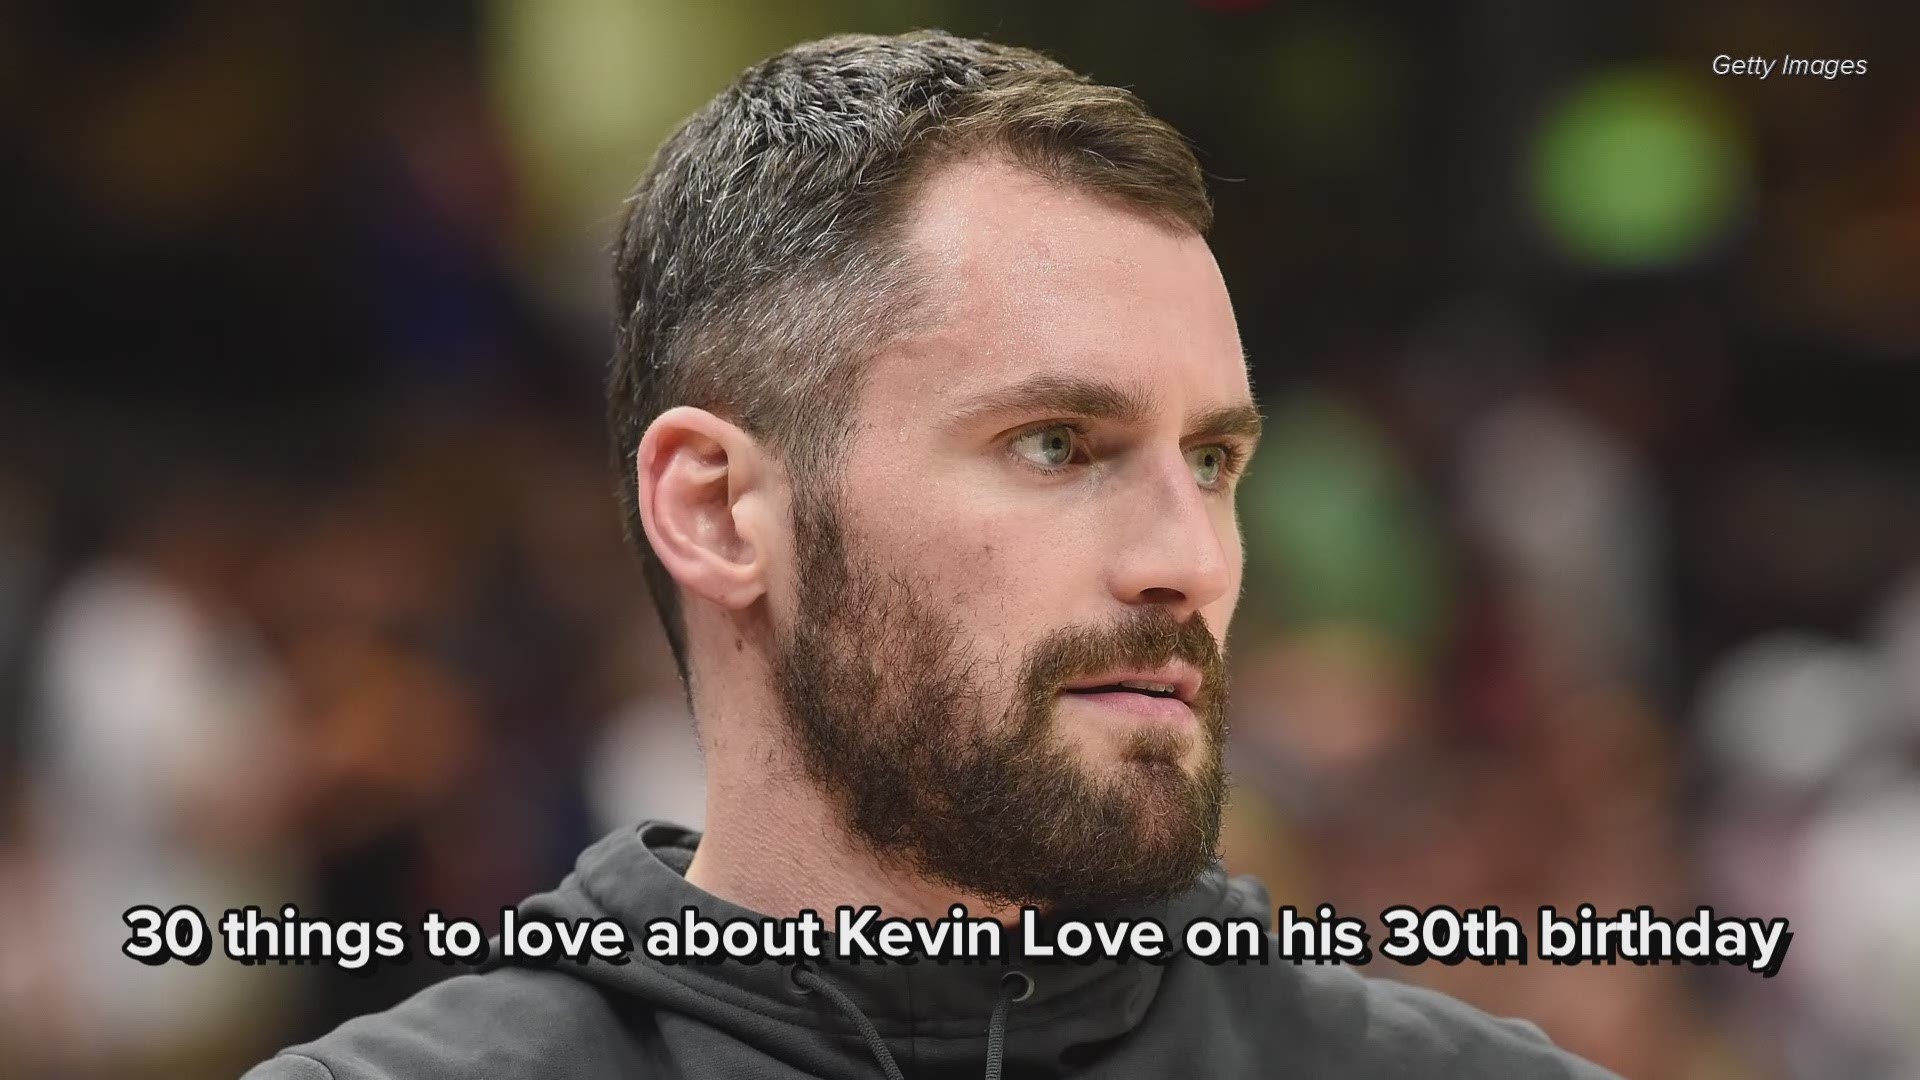 Cavaliers Player Kevin Love is the New Face of Banana Republic